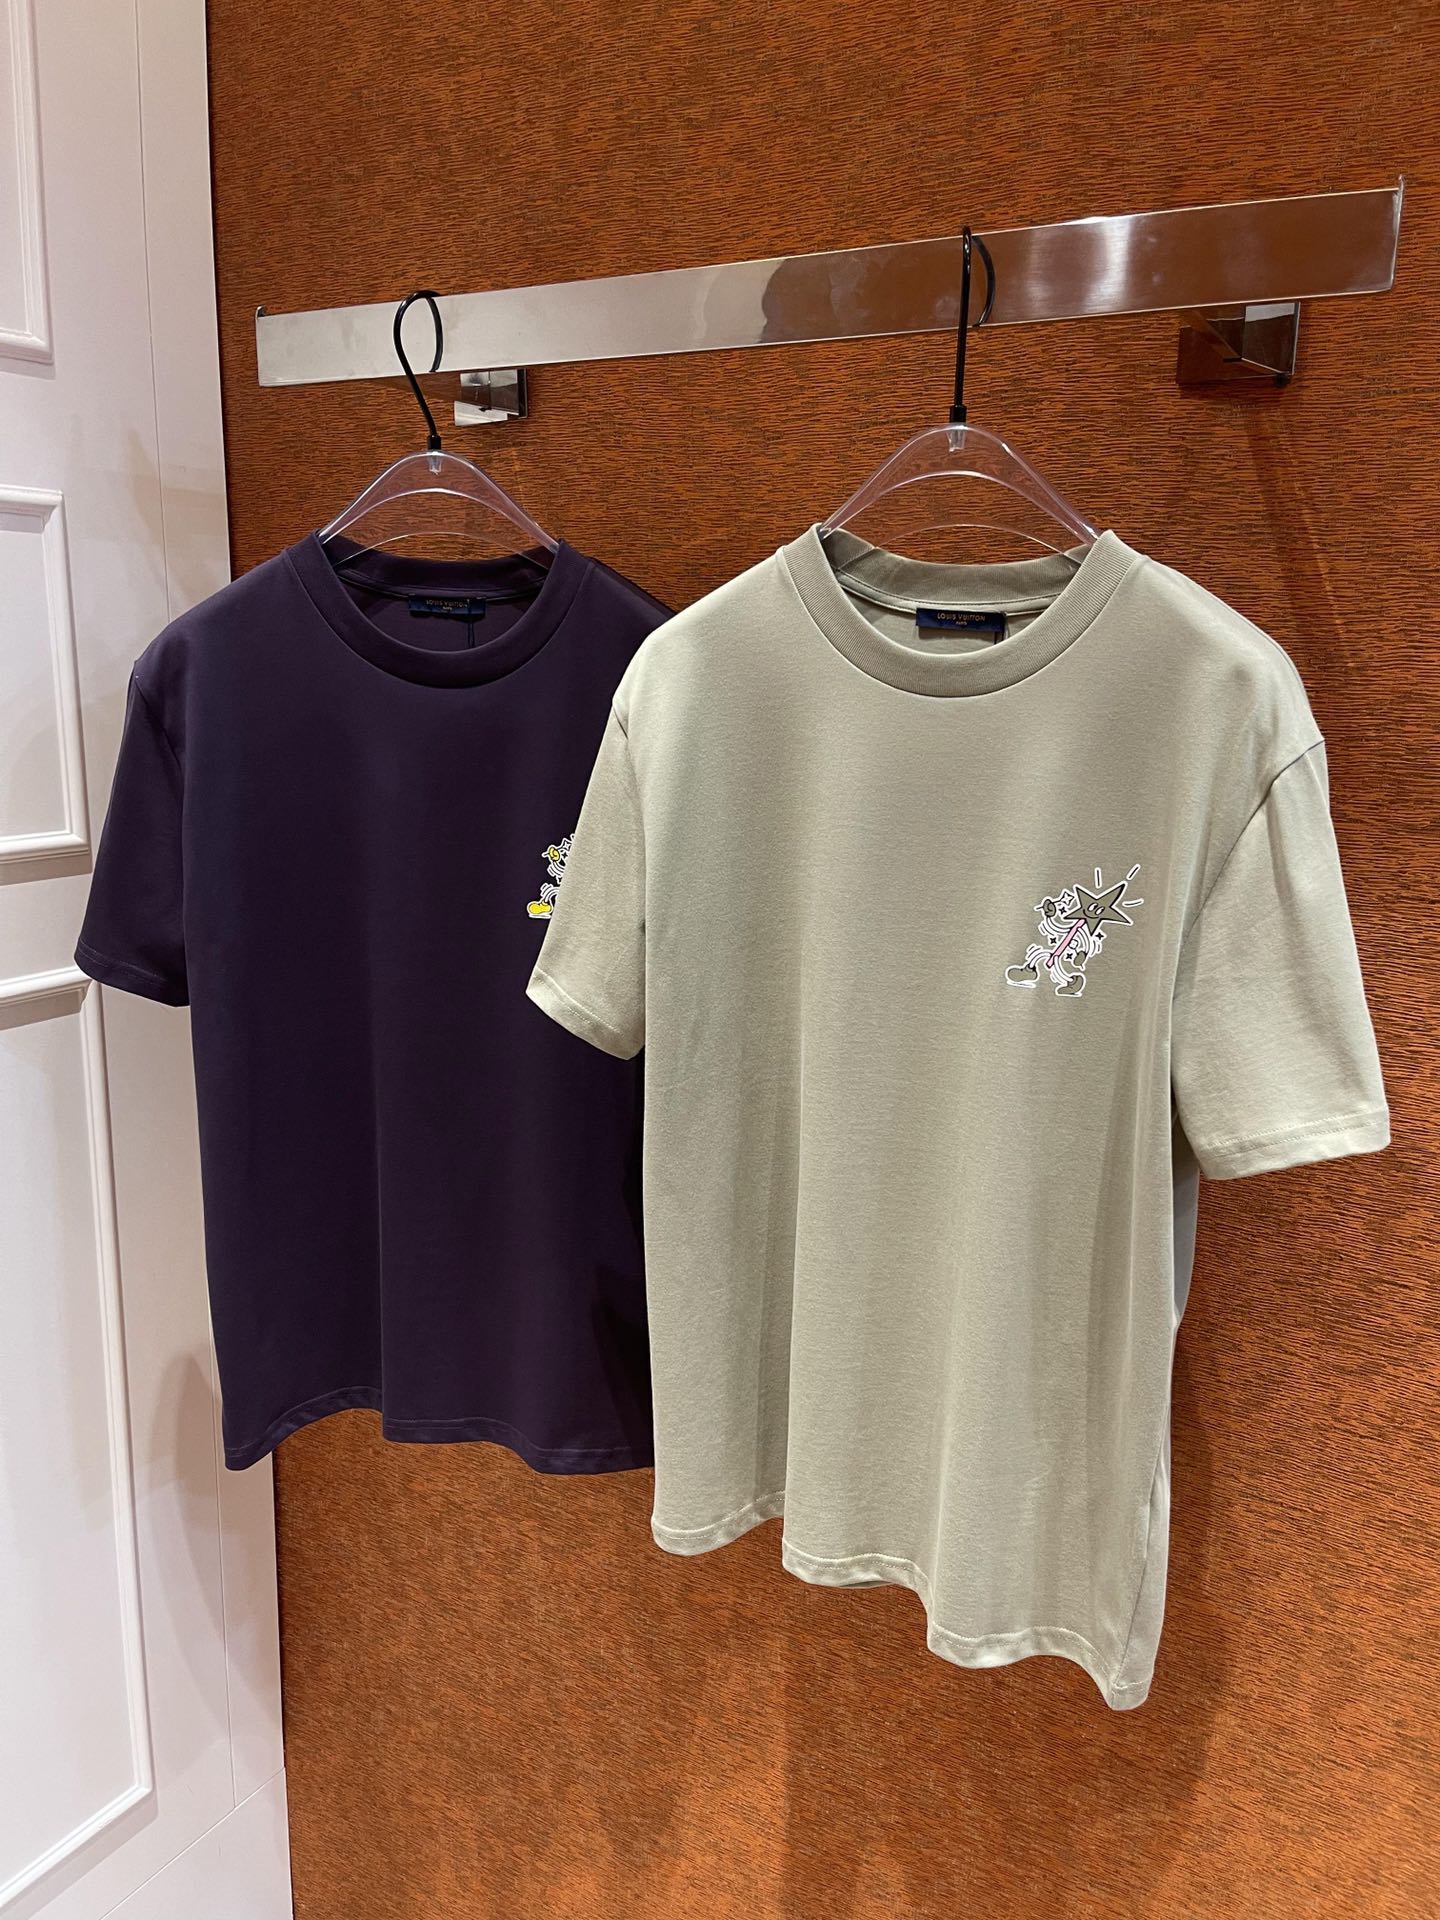 Louis Vuitton Clothing T-Shirt Apricot Color Purple Printing Unisex Combed Cotton Summer Collection Short Sleeve